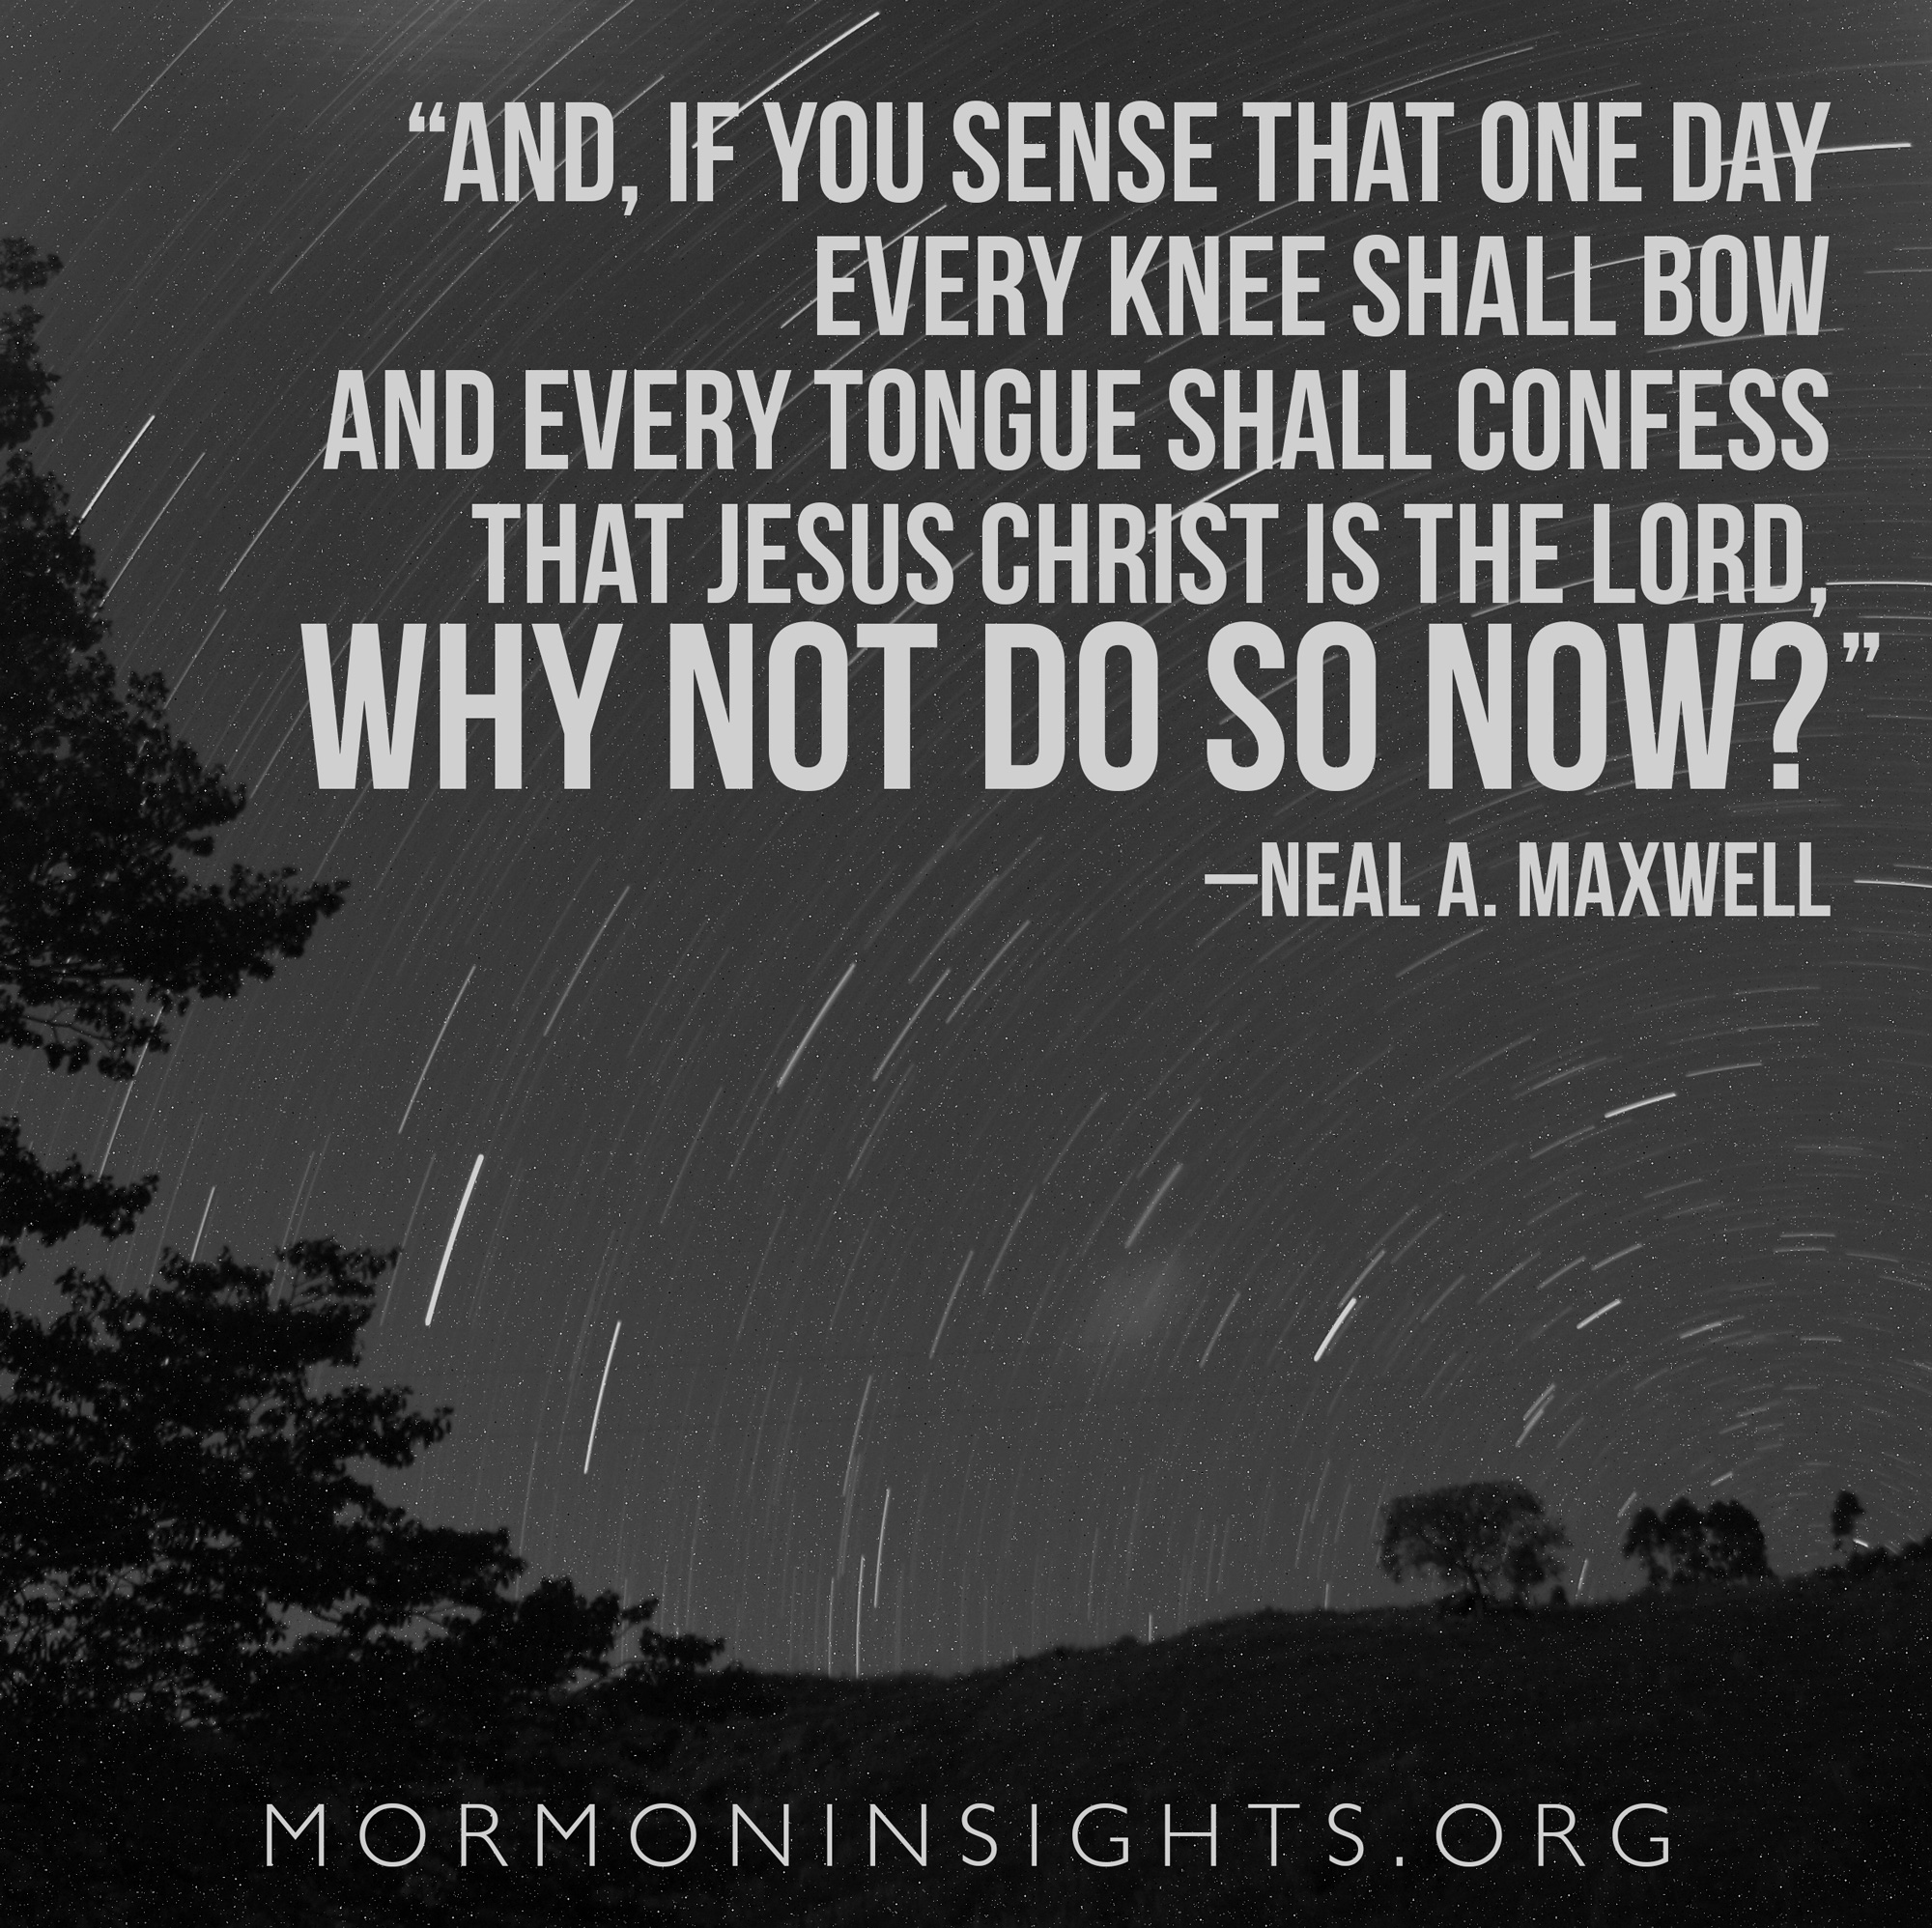 "And, if you sense that one day every knee shall bow and every tongue shall confess that Jesus Christ is the Lord, why not do so now?" -Neal A. Maxwell